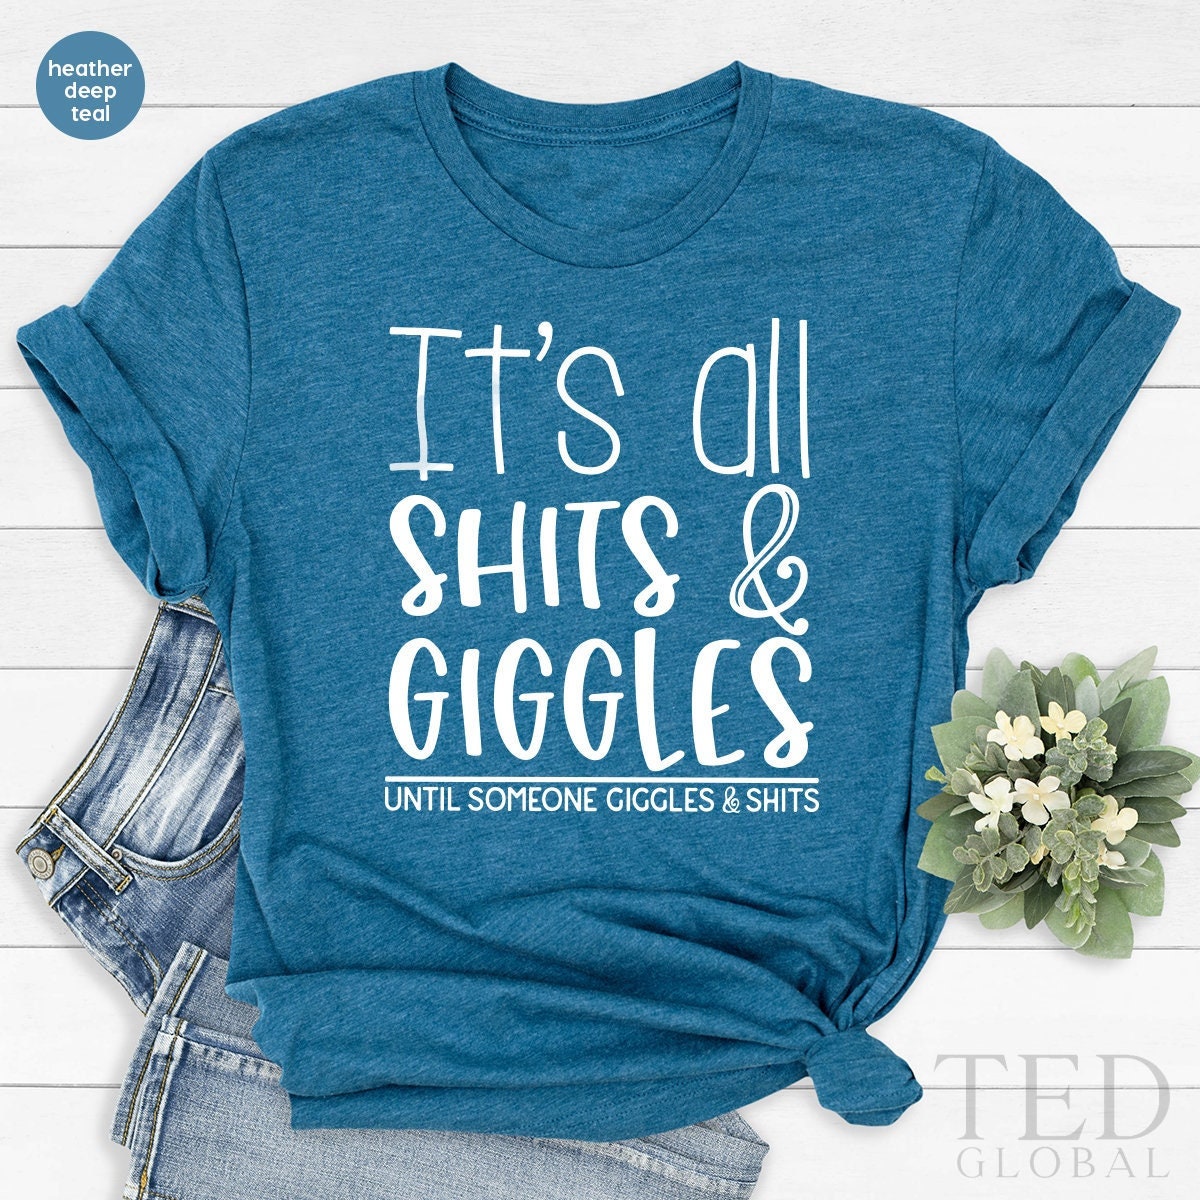 Funny Saying Shirt, Sarcastic T-Shirt, Mothers Day Gift, Adult Humor T Shirt, Shits And Giggles Tee, Sassy Quote Shirt, Funny T-Shirt Women - Fastdeliverytees.com